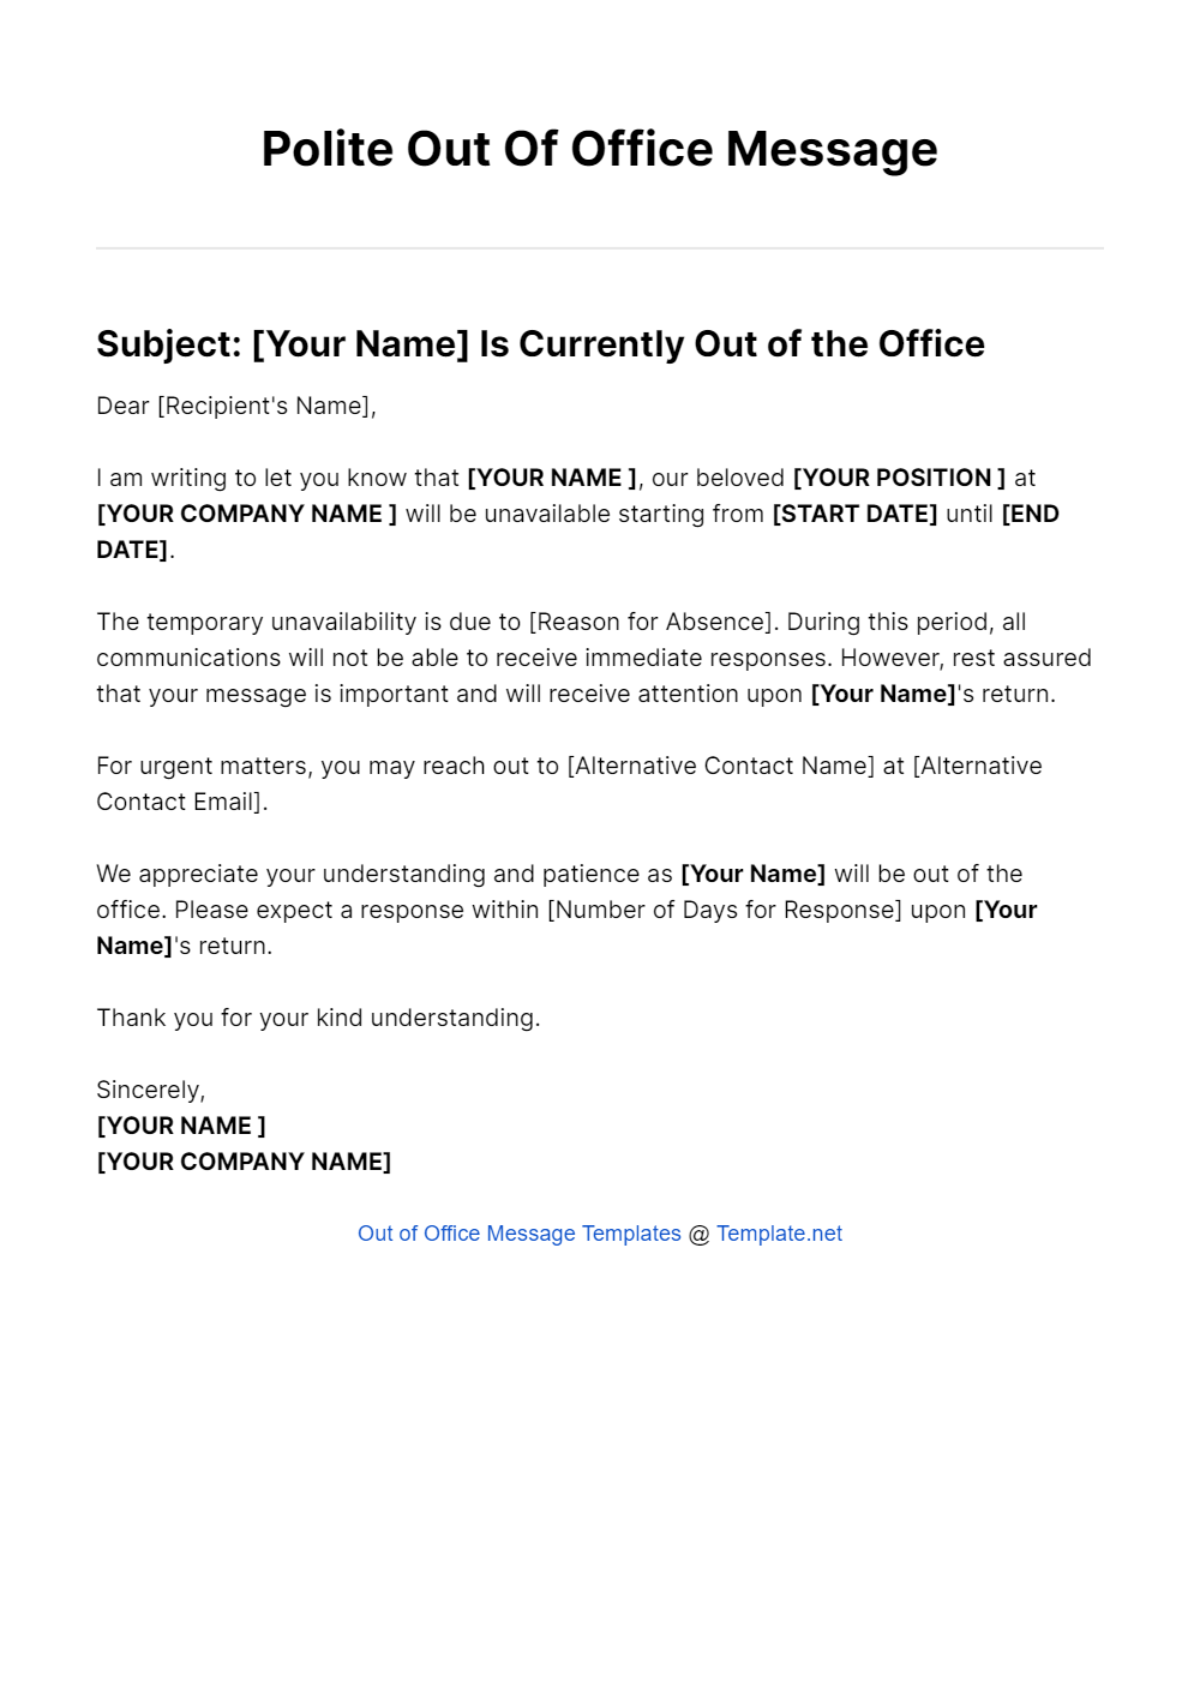 Polite Out Of Office Message Template